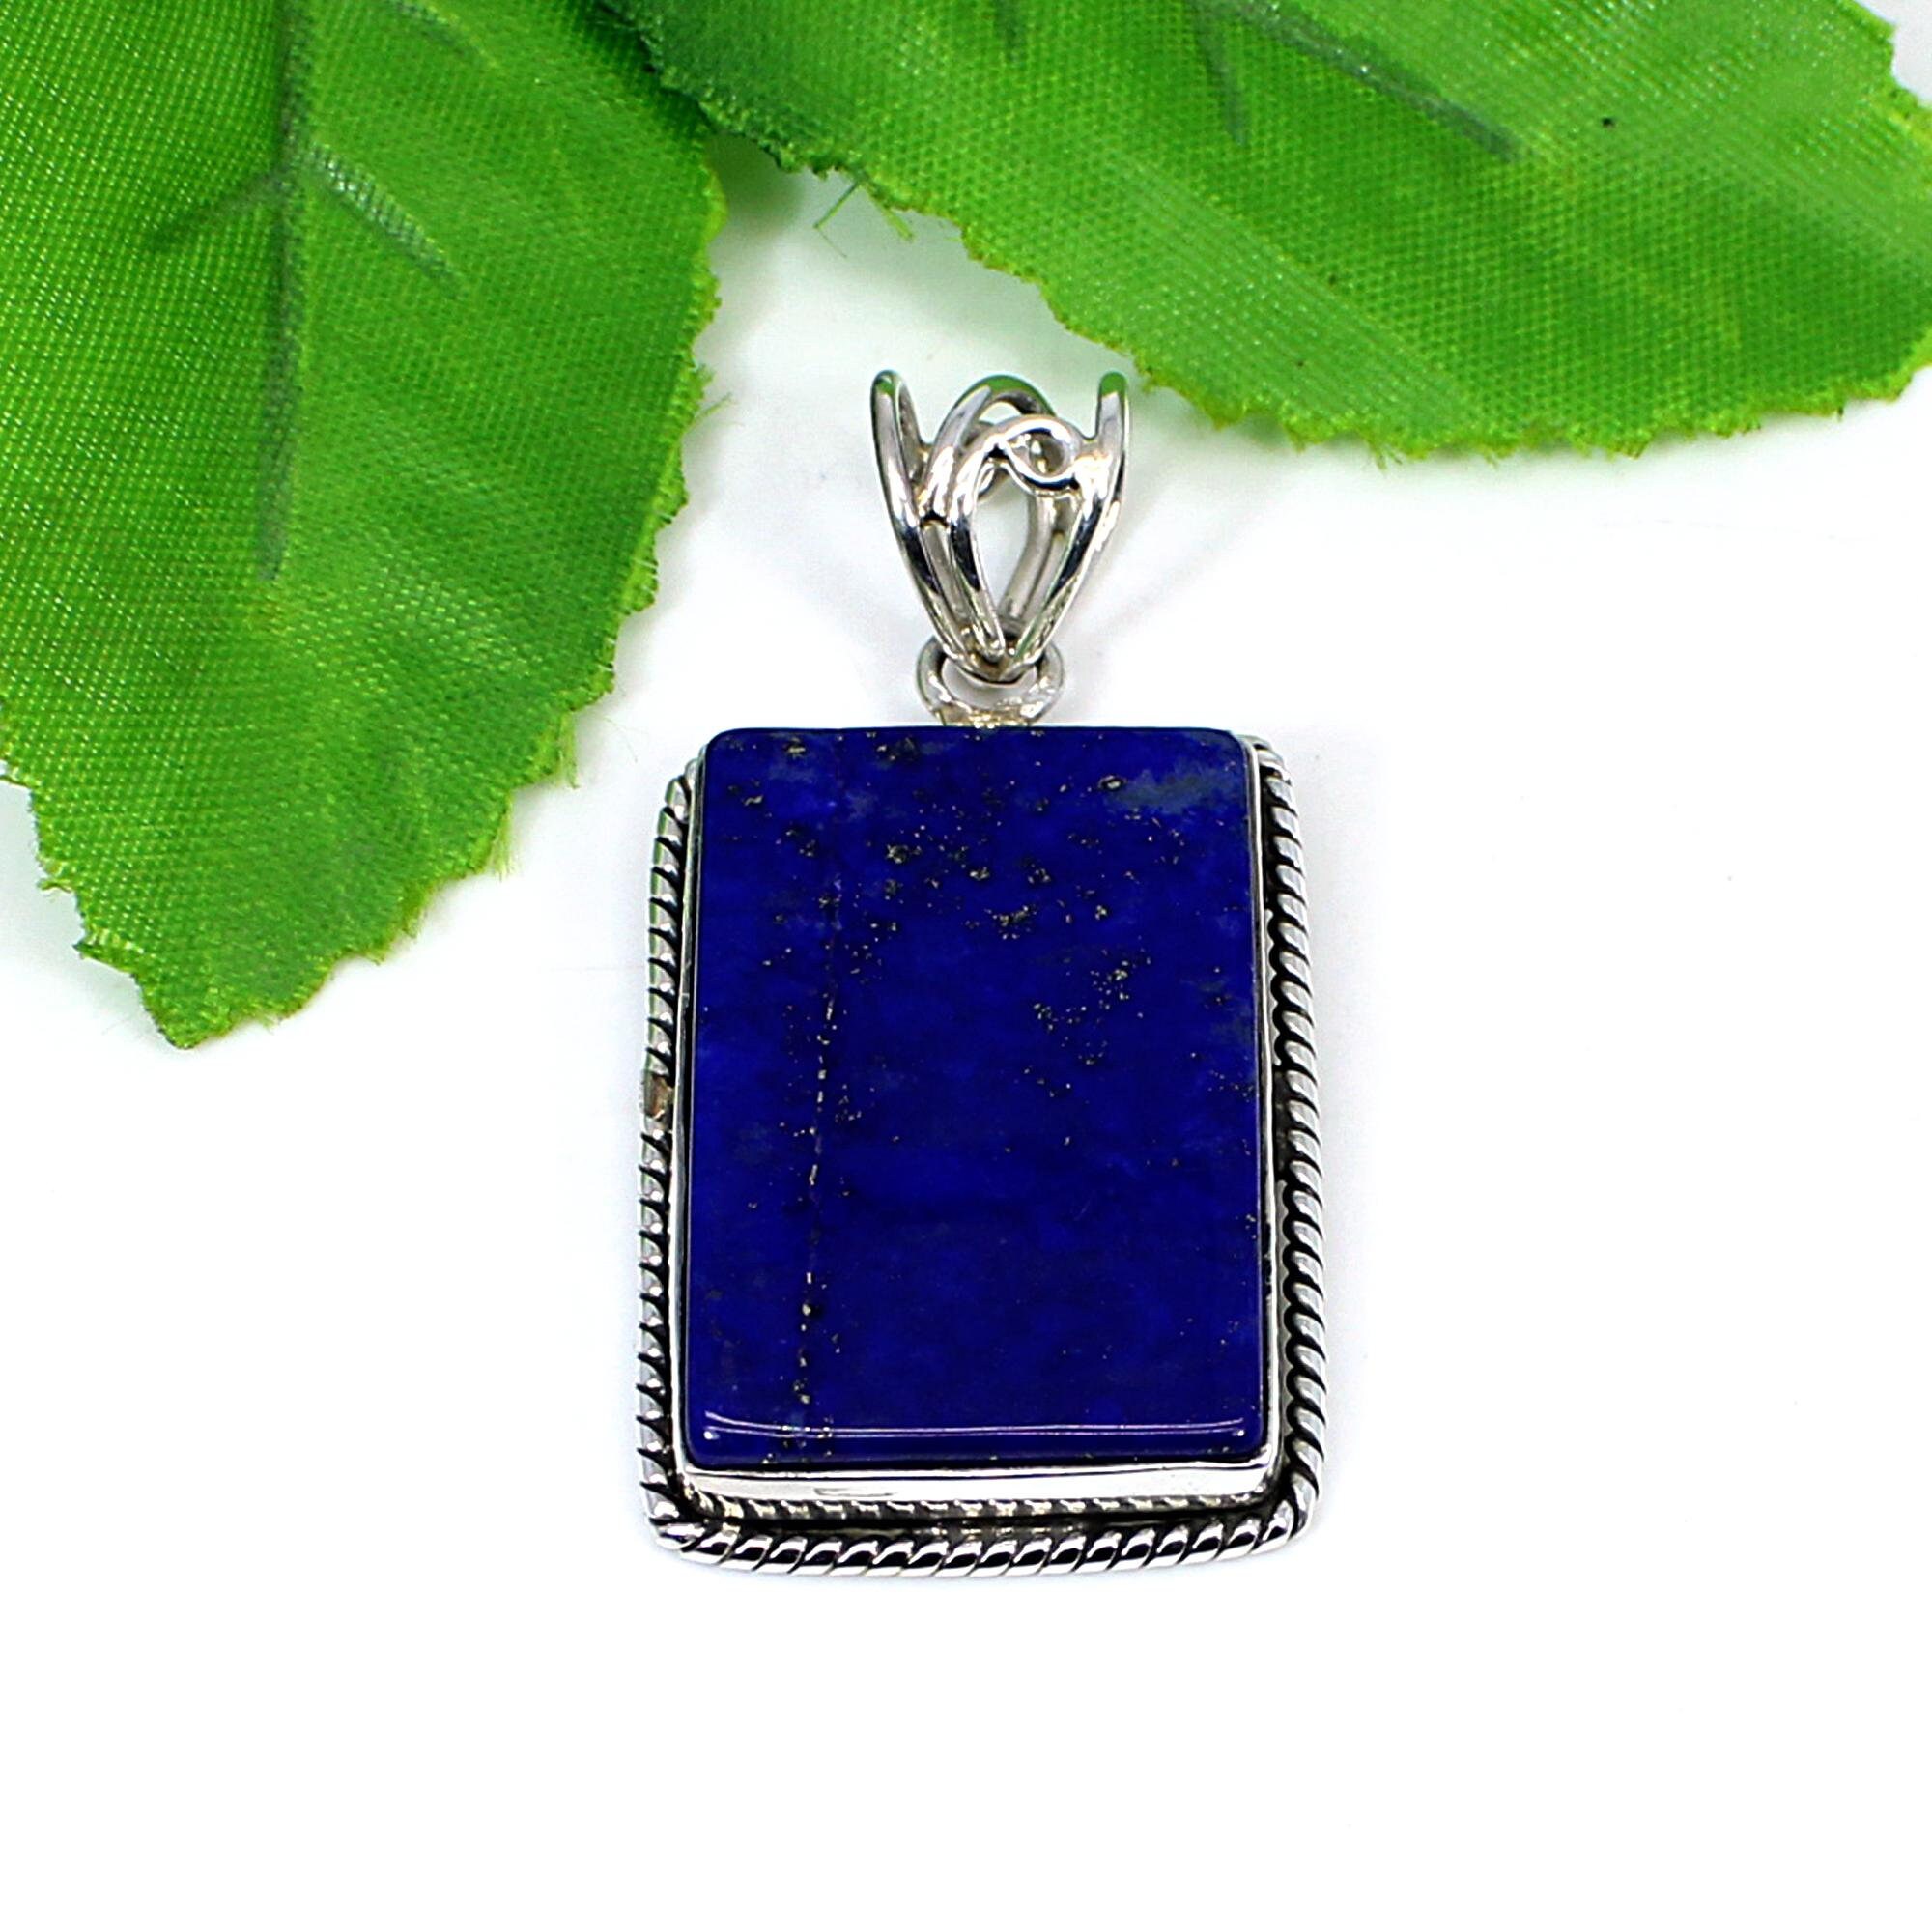 Details about   WEALTHINESS LUCKLY LAPIS RECTANGLE SOLID STERLING 925 SILVER PENDANT 